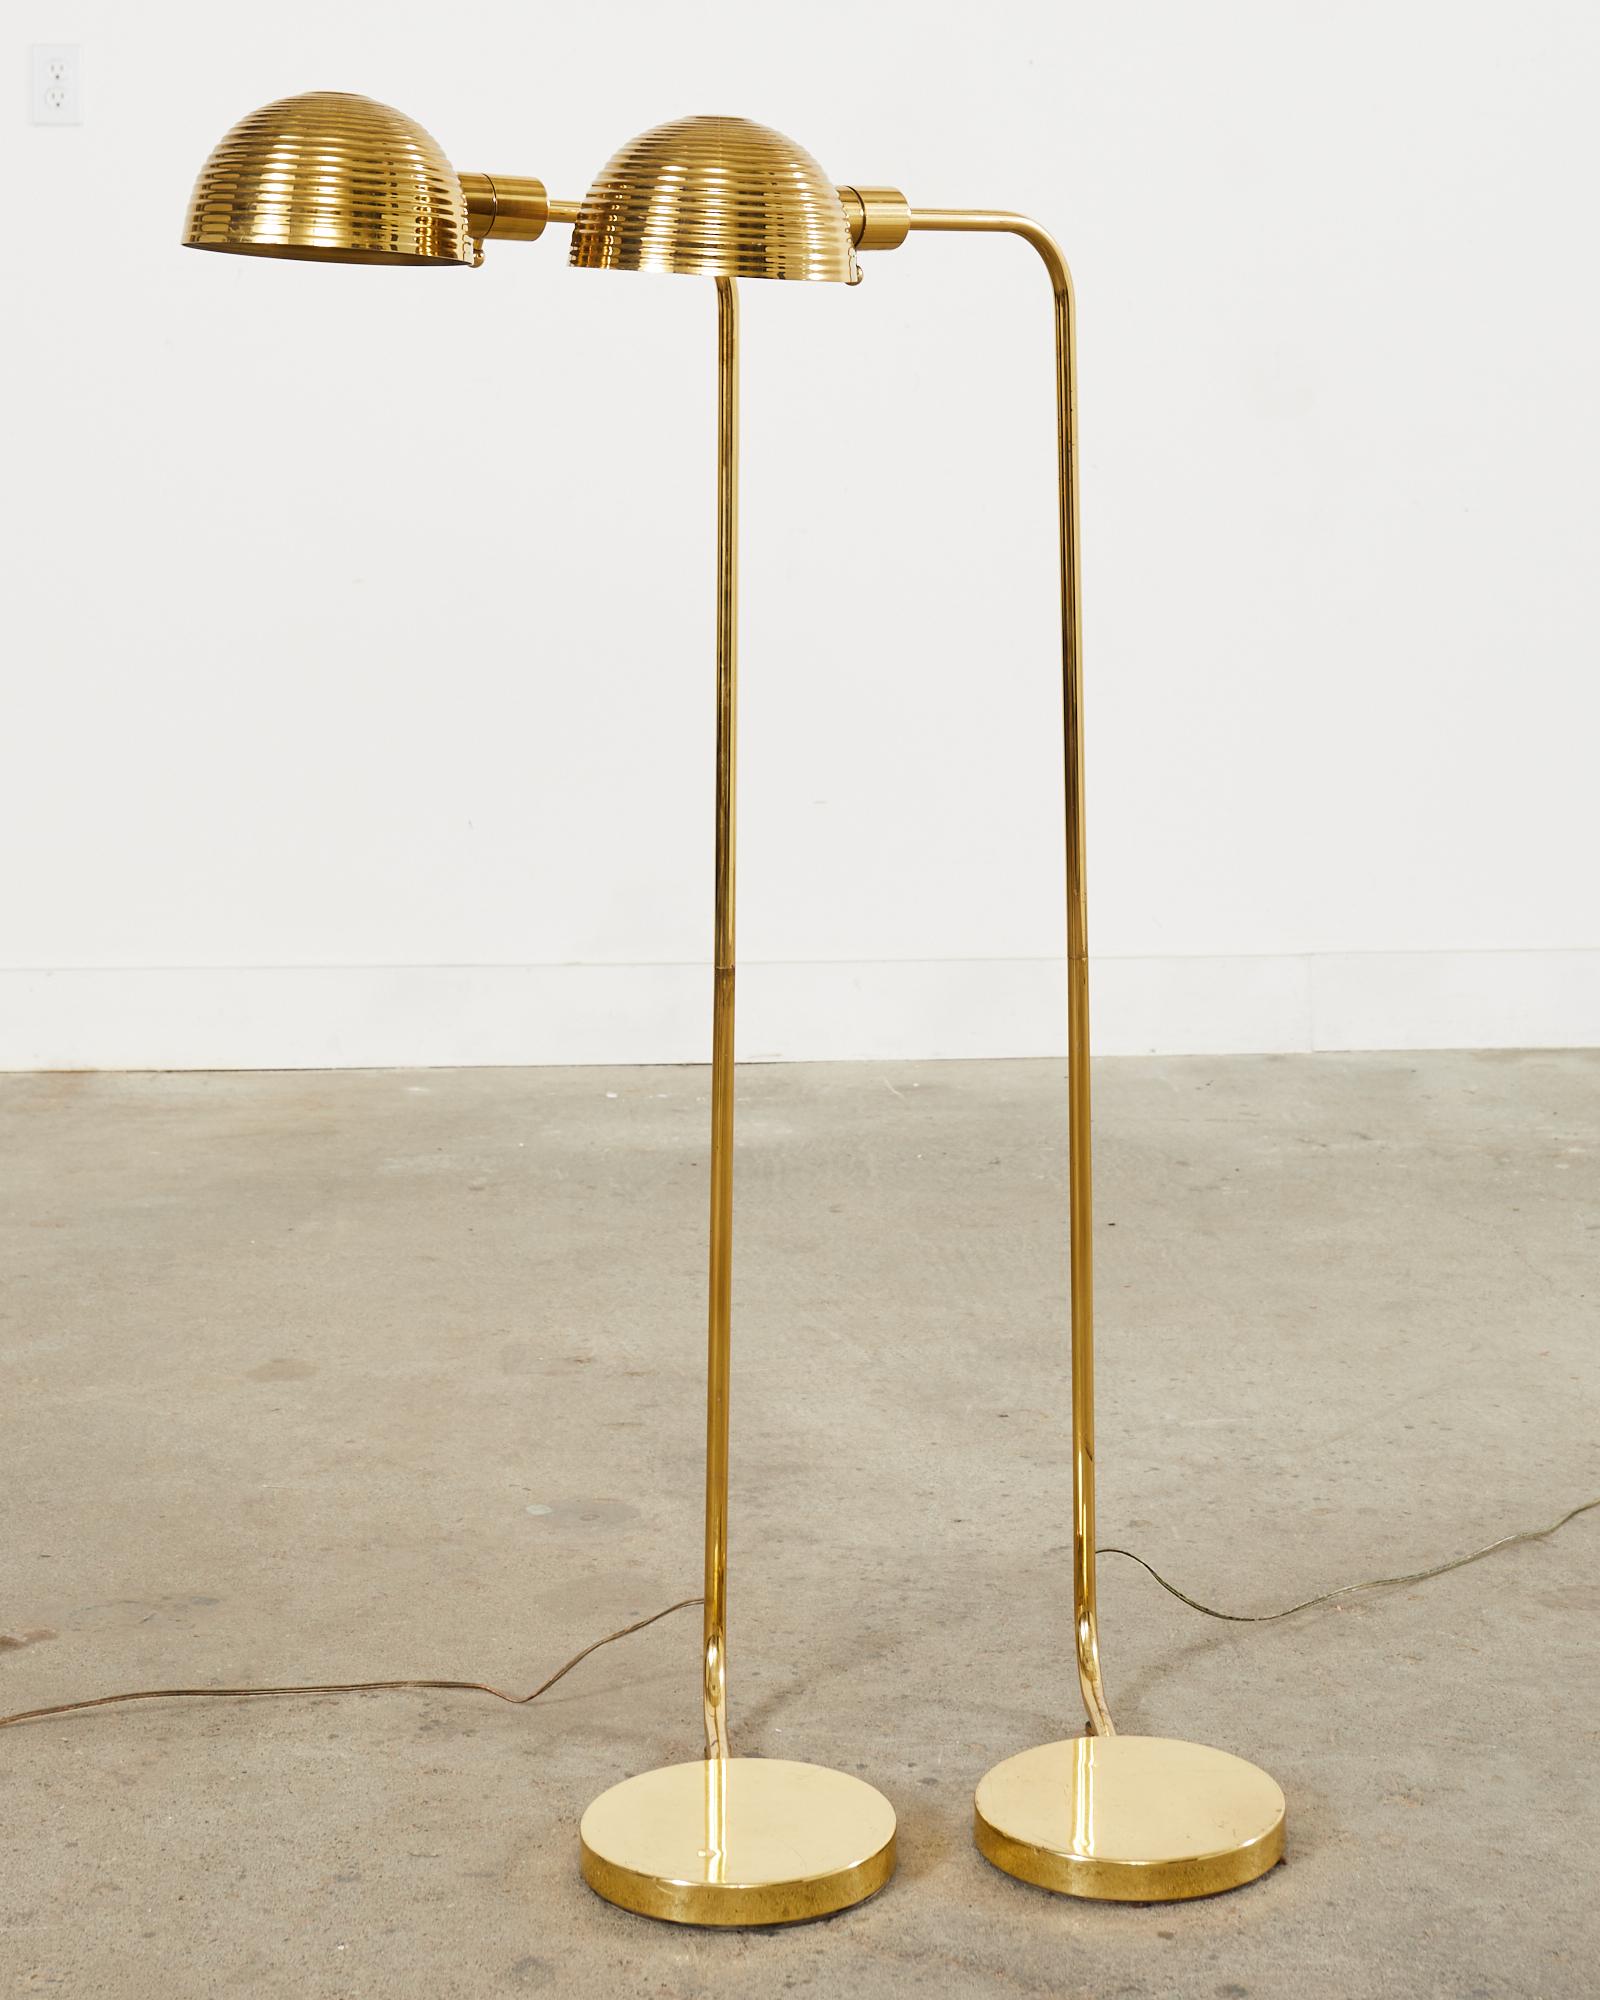 Pair of Art Deco Style Polished Brass Task Floor Lamps 1